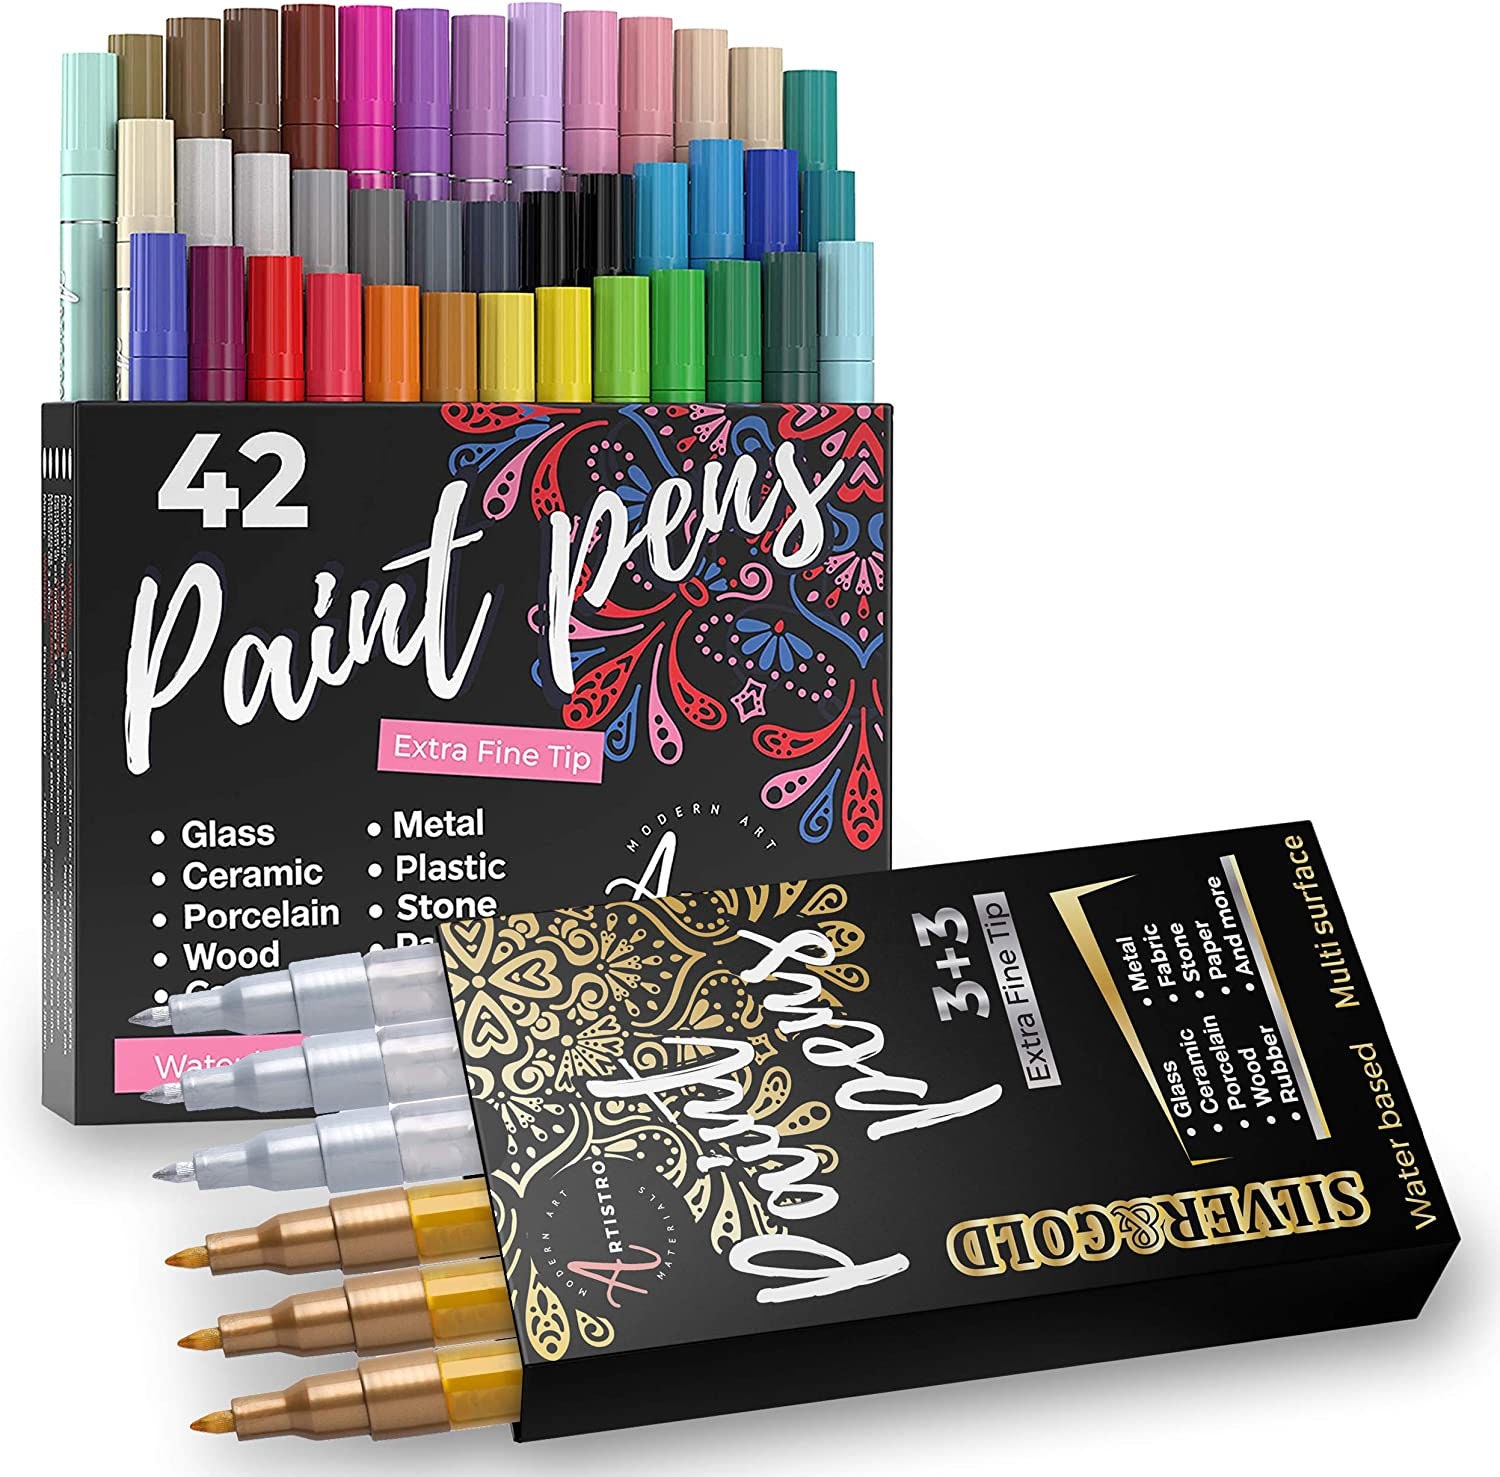 48 Cute Acrylic Artistro Paint Pens 42 3 Gold & 3 Silver Extra